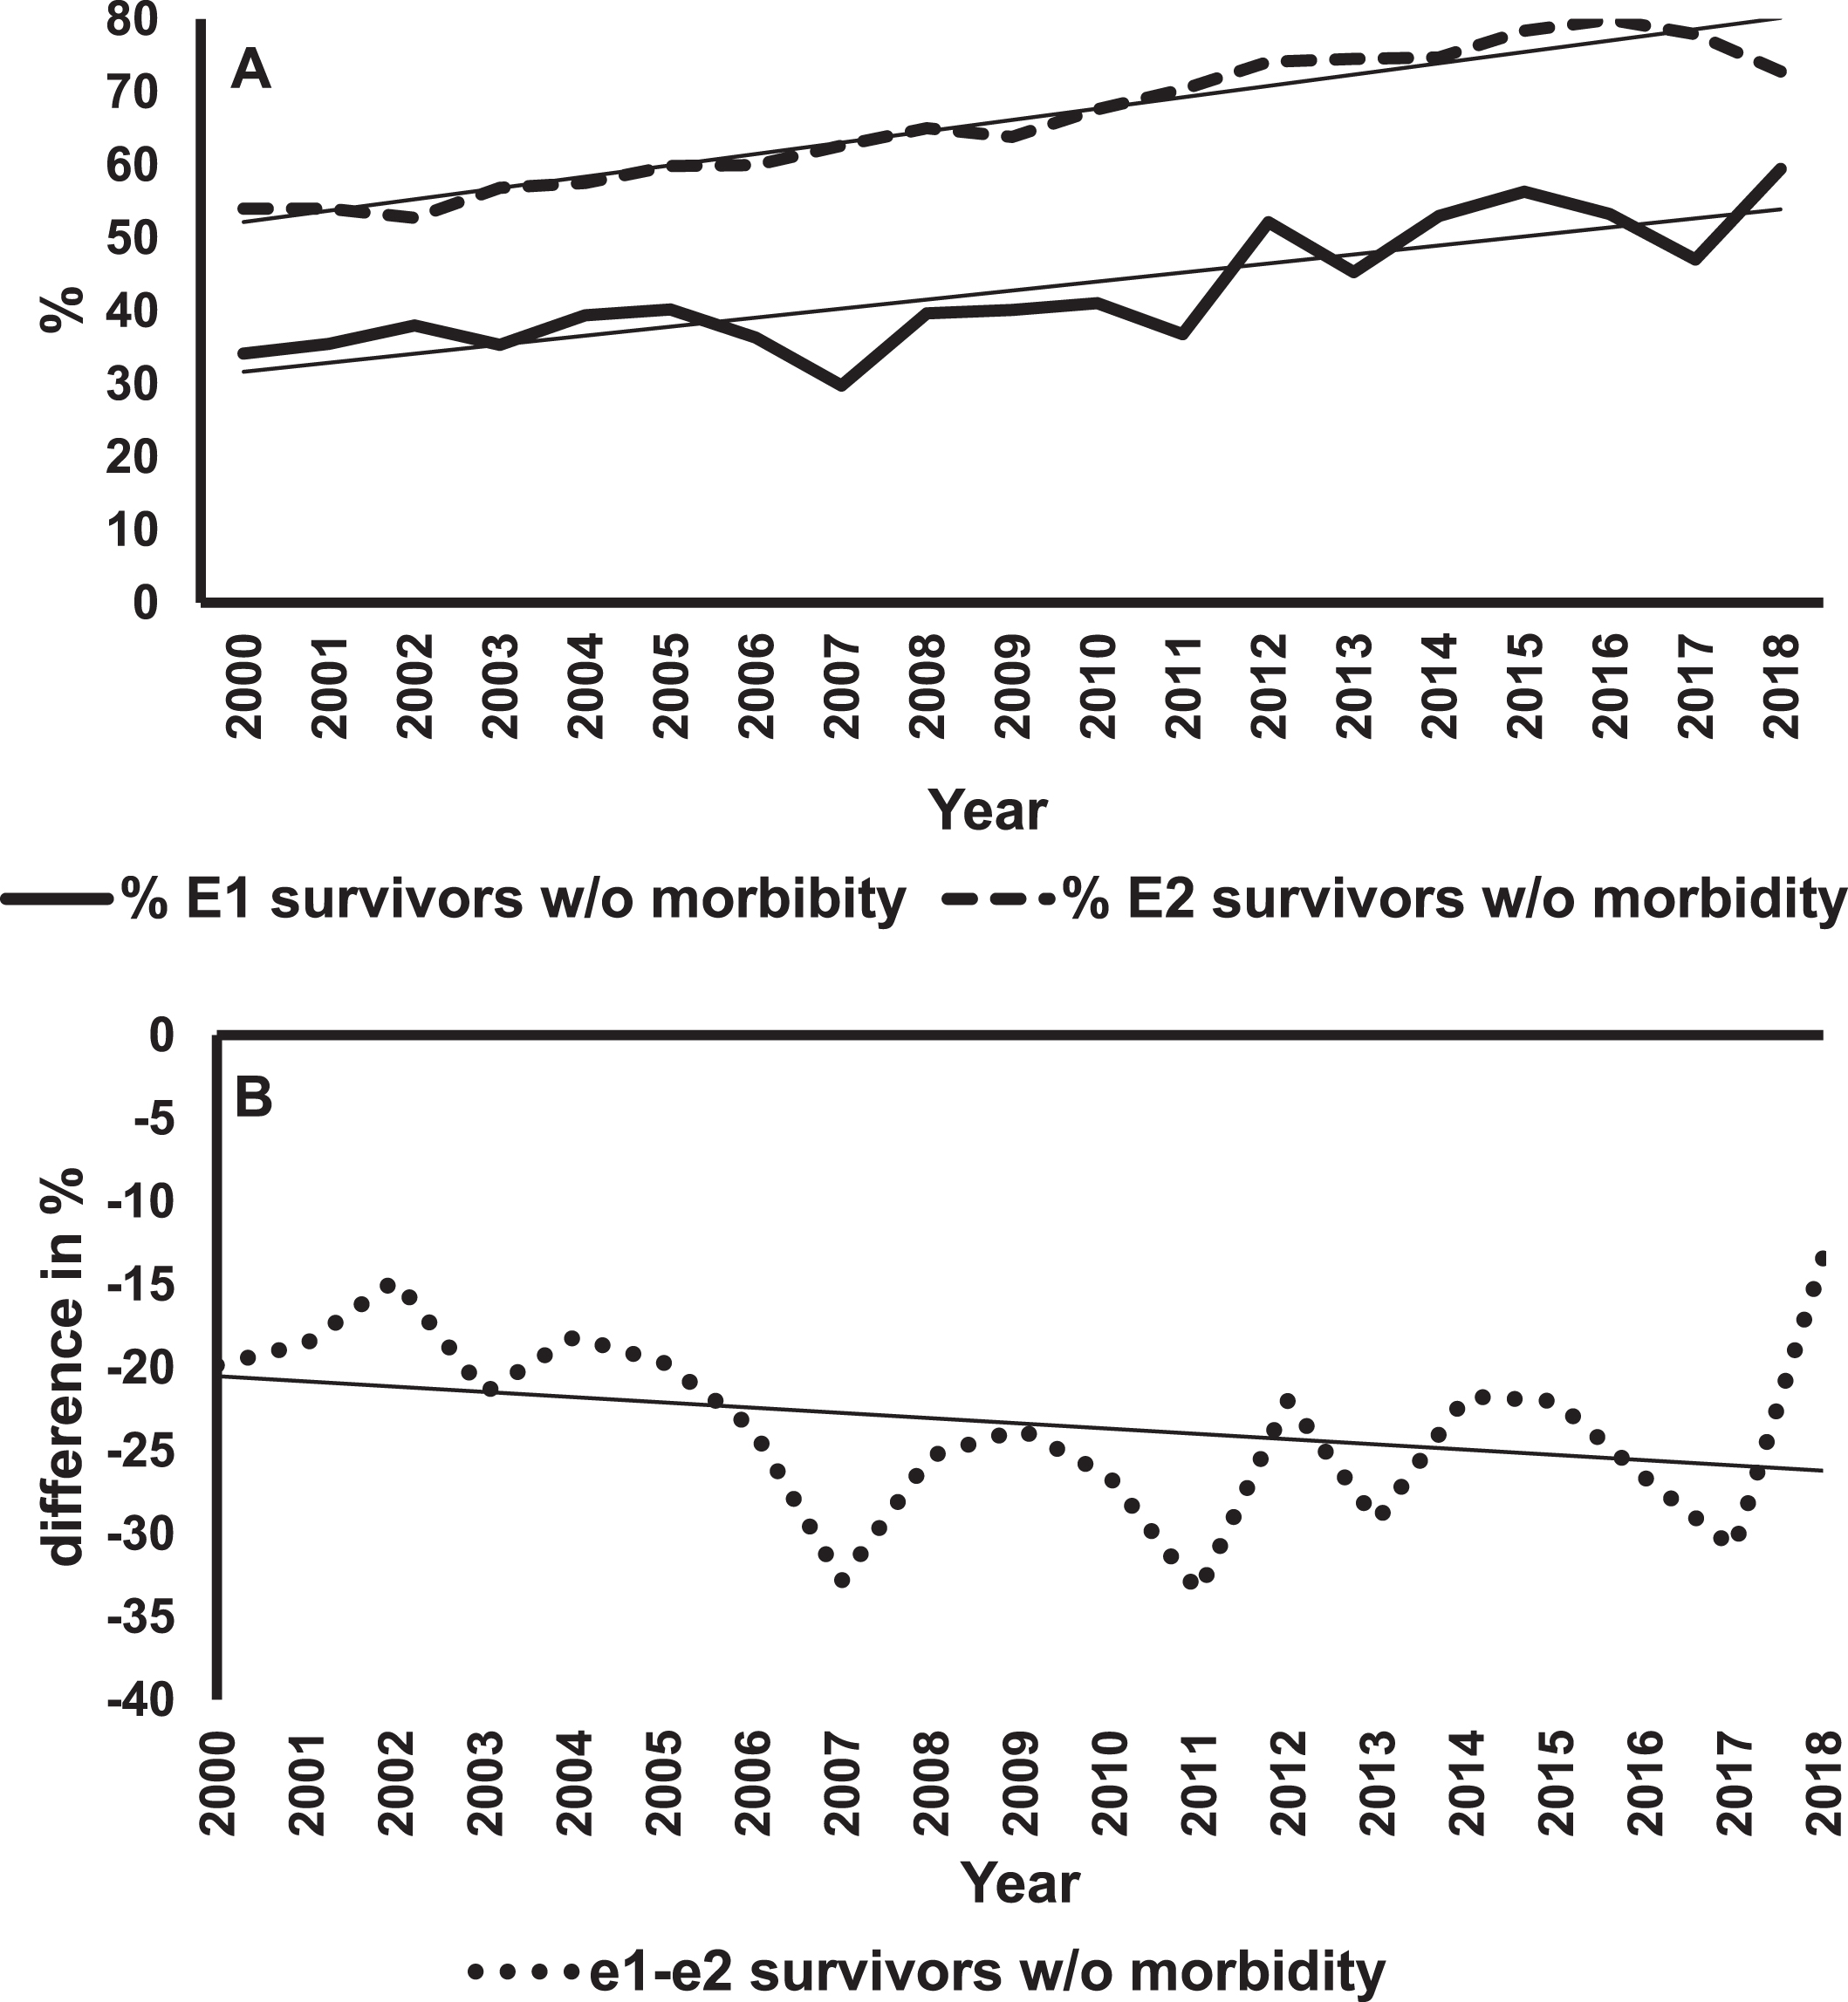 Survival of E1 and E2 infants without any major morbidity. Panel A shows the percent survival without major morbidity for E1 (solid line) and E2 (dashed line) infants over 19 years with the best fitting regression lines superimposed on the data for each group of infants. The slope for E1 = 0.90% /year, p < 0.001. The slope for E2 = 1.26% /year, p < 0.001. Panel B is a plot of the difference in percent survival without major morbidity (E1 minus E2) for each year and the best fitting regression line. The slope is –0.36% /year, p < 0.013.